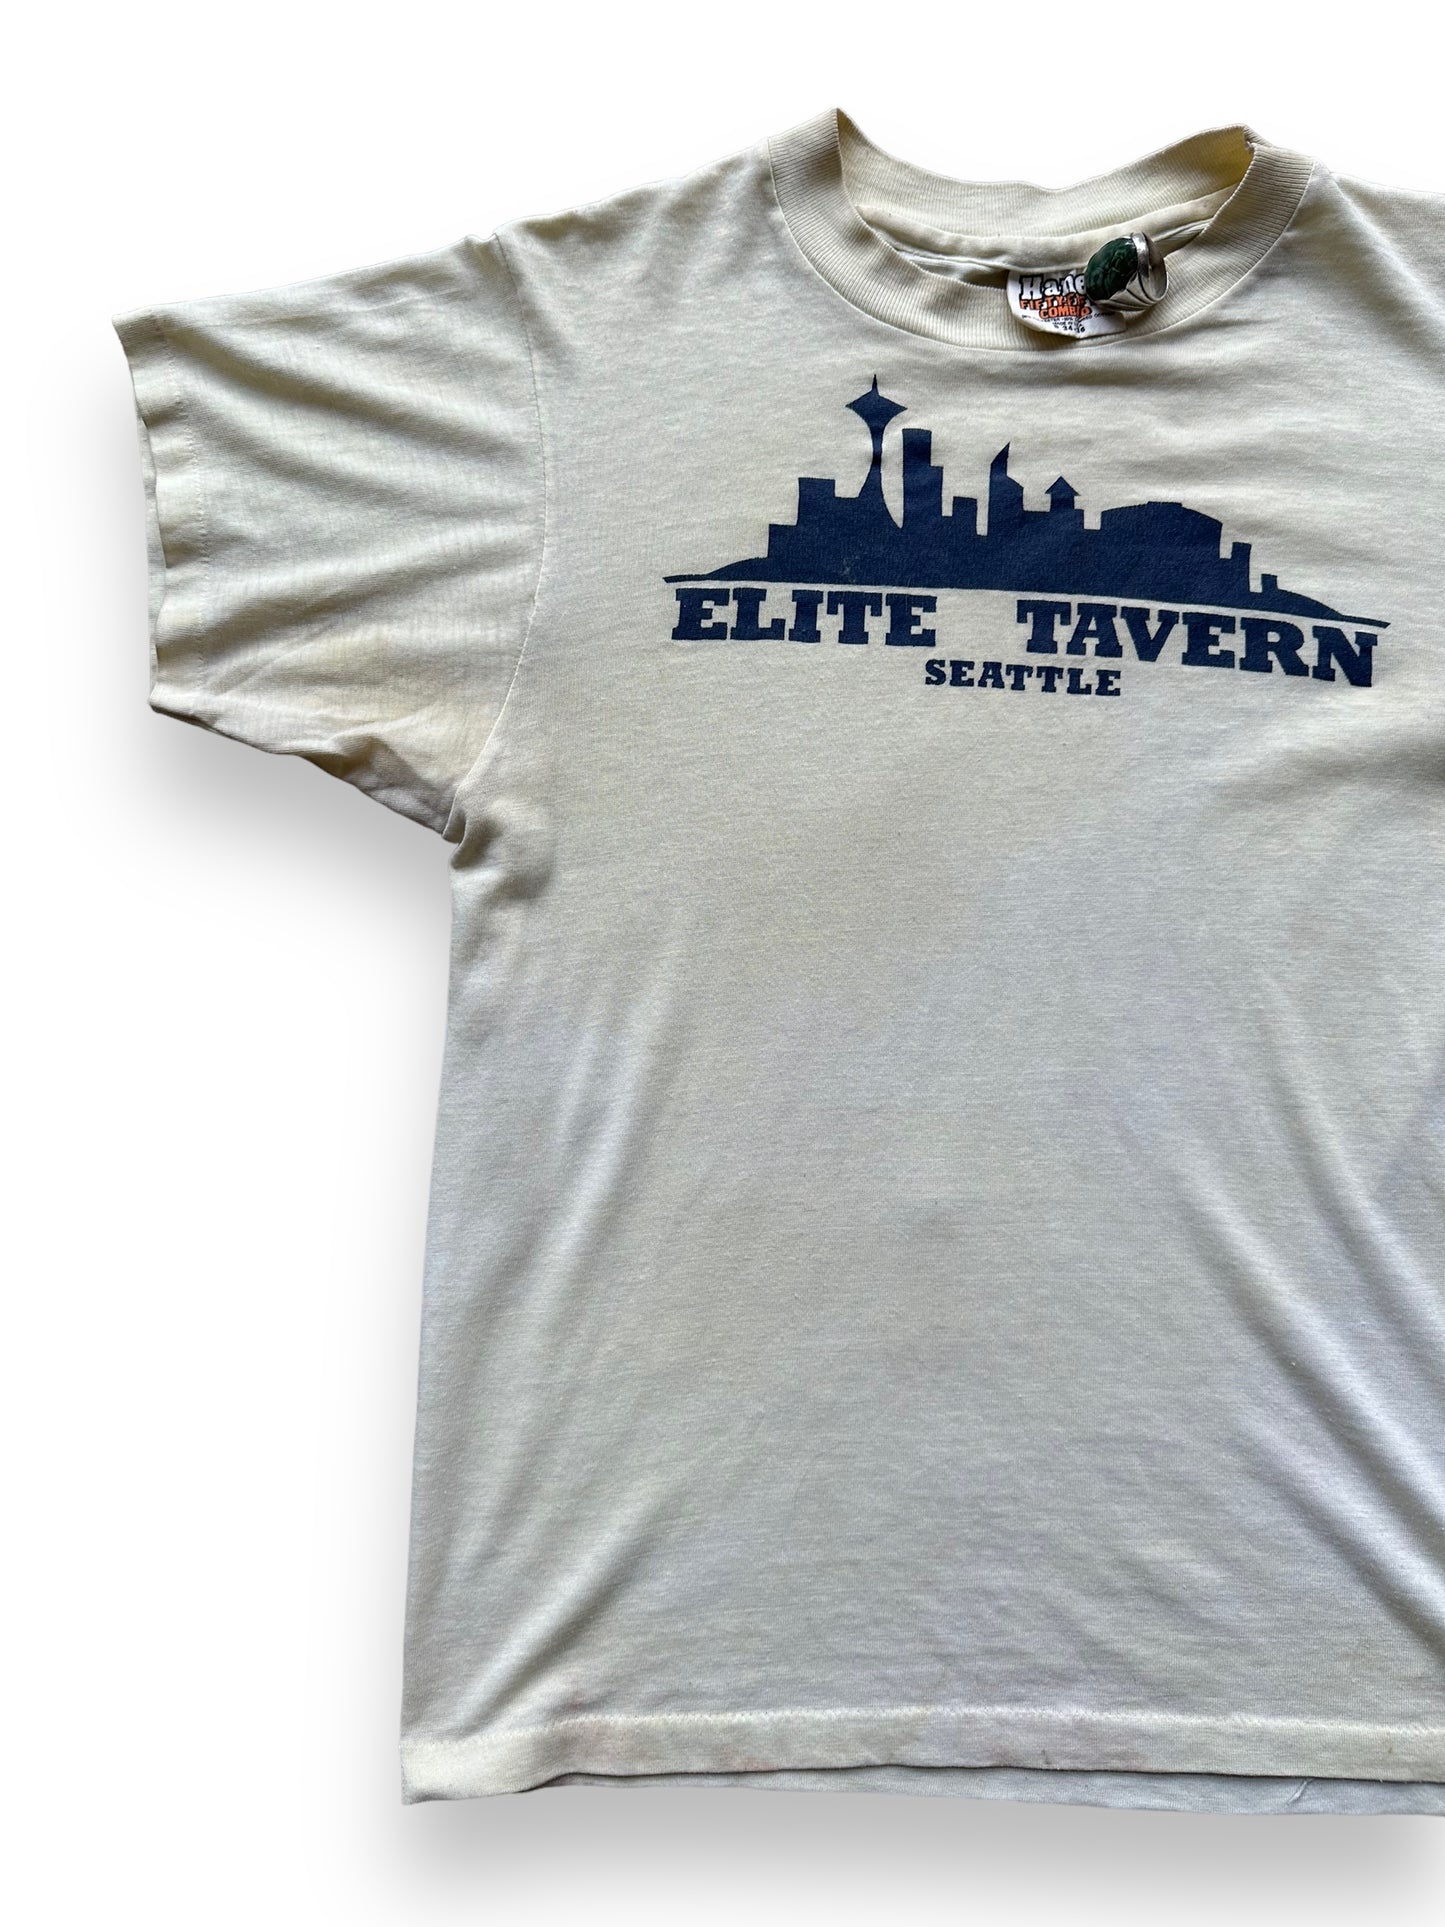 Front Right View of Vintage Elite Tavern Seattle Tee SZ S | Vintage Single Stitch T-Shirts Seattle | Barn Owl Vintage Tees Seattle